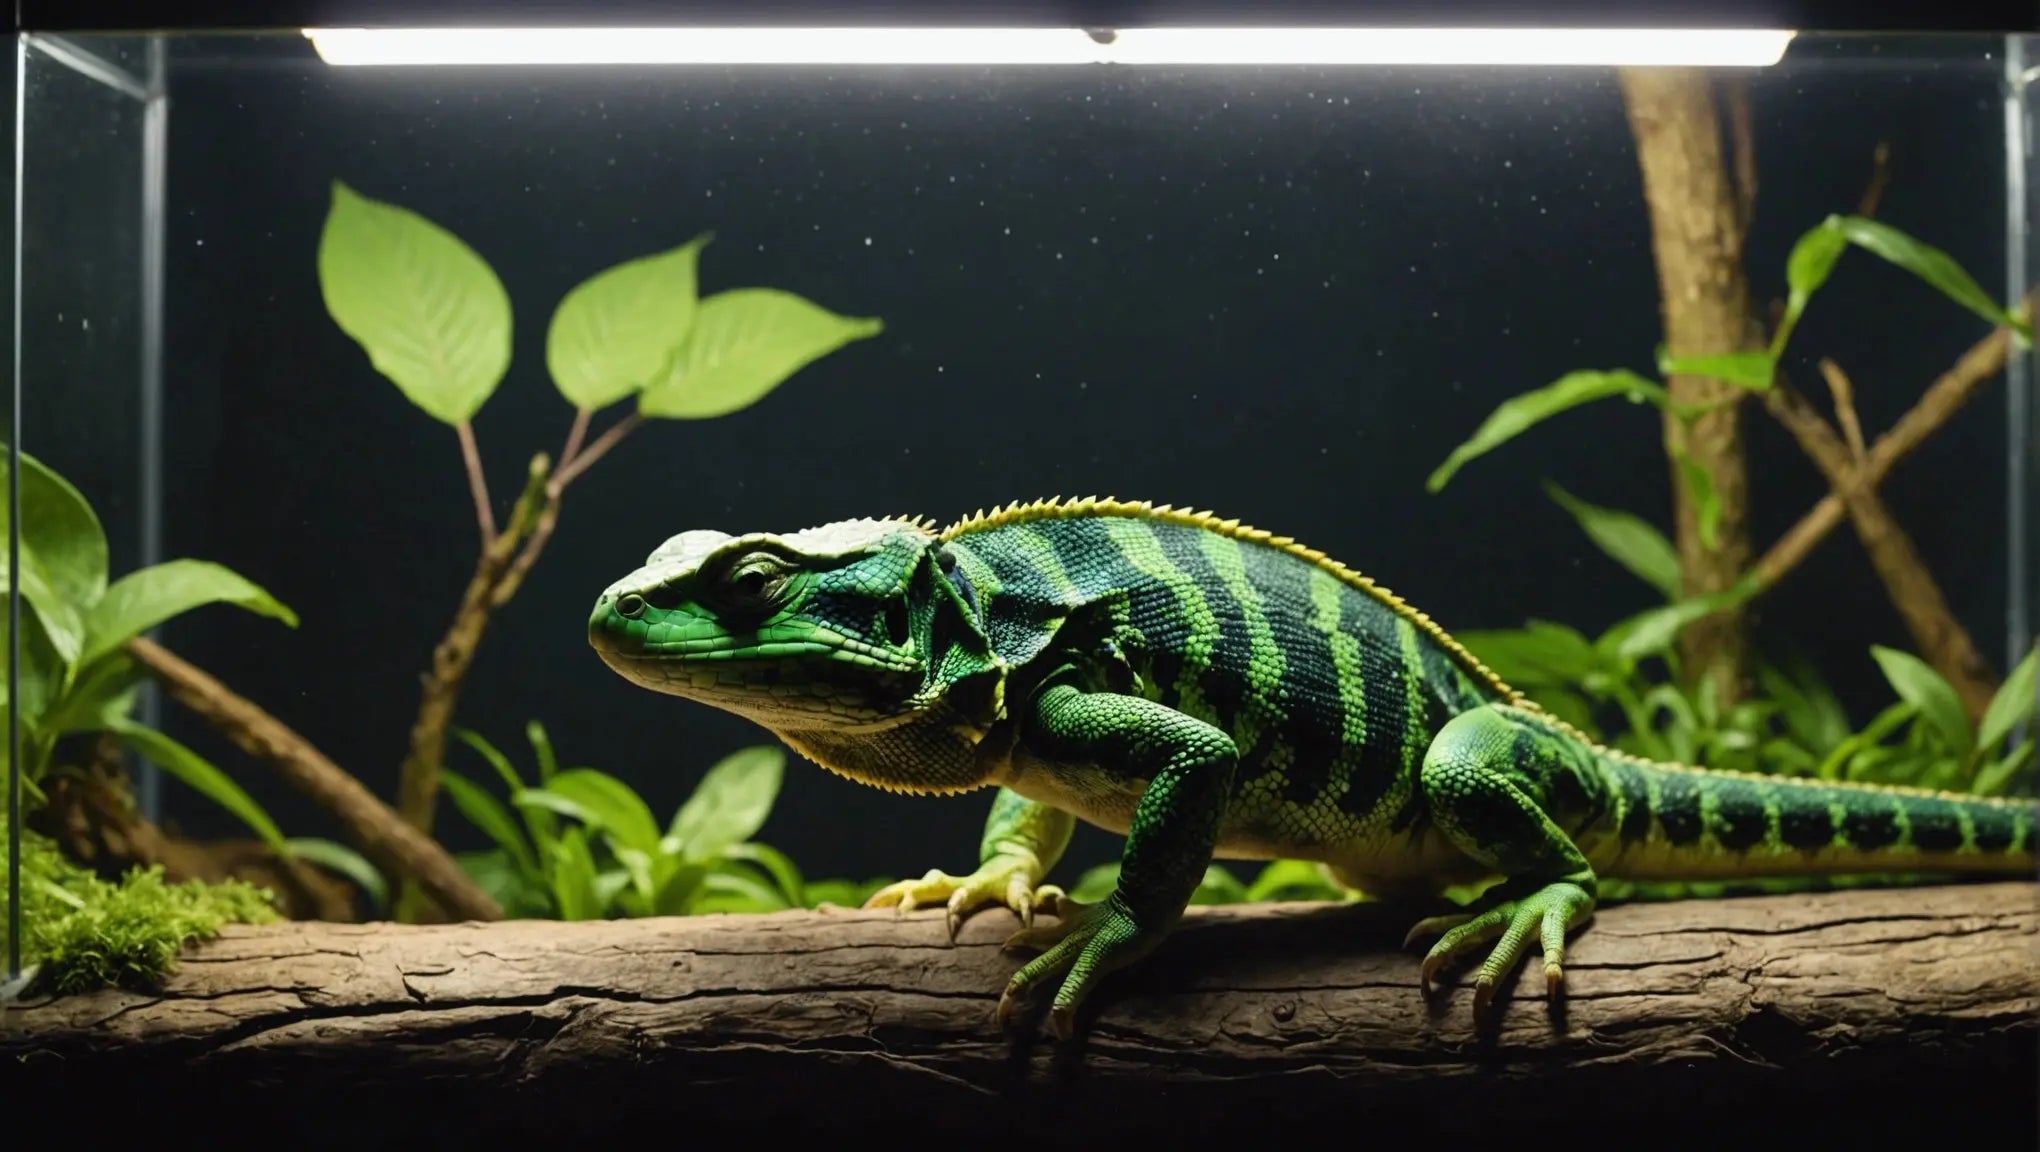 Illuminate Your Reptile's World: The Power of Lights